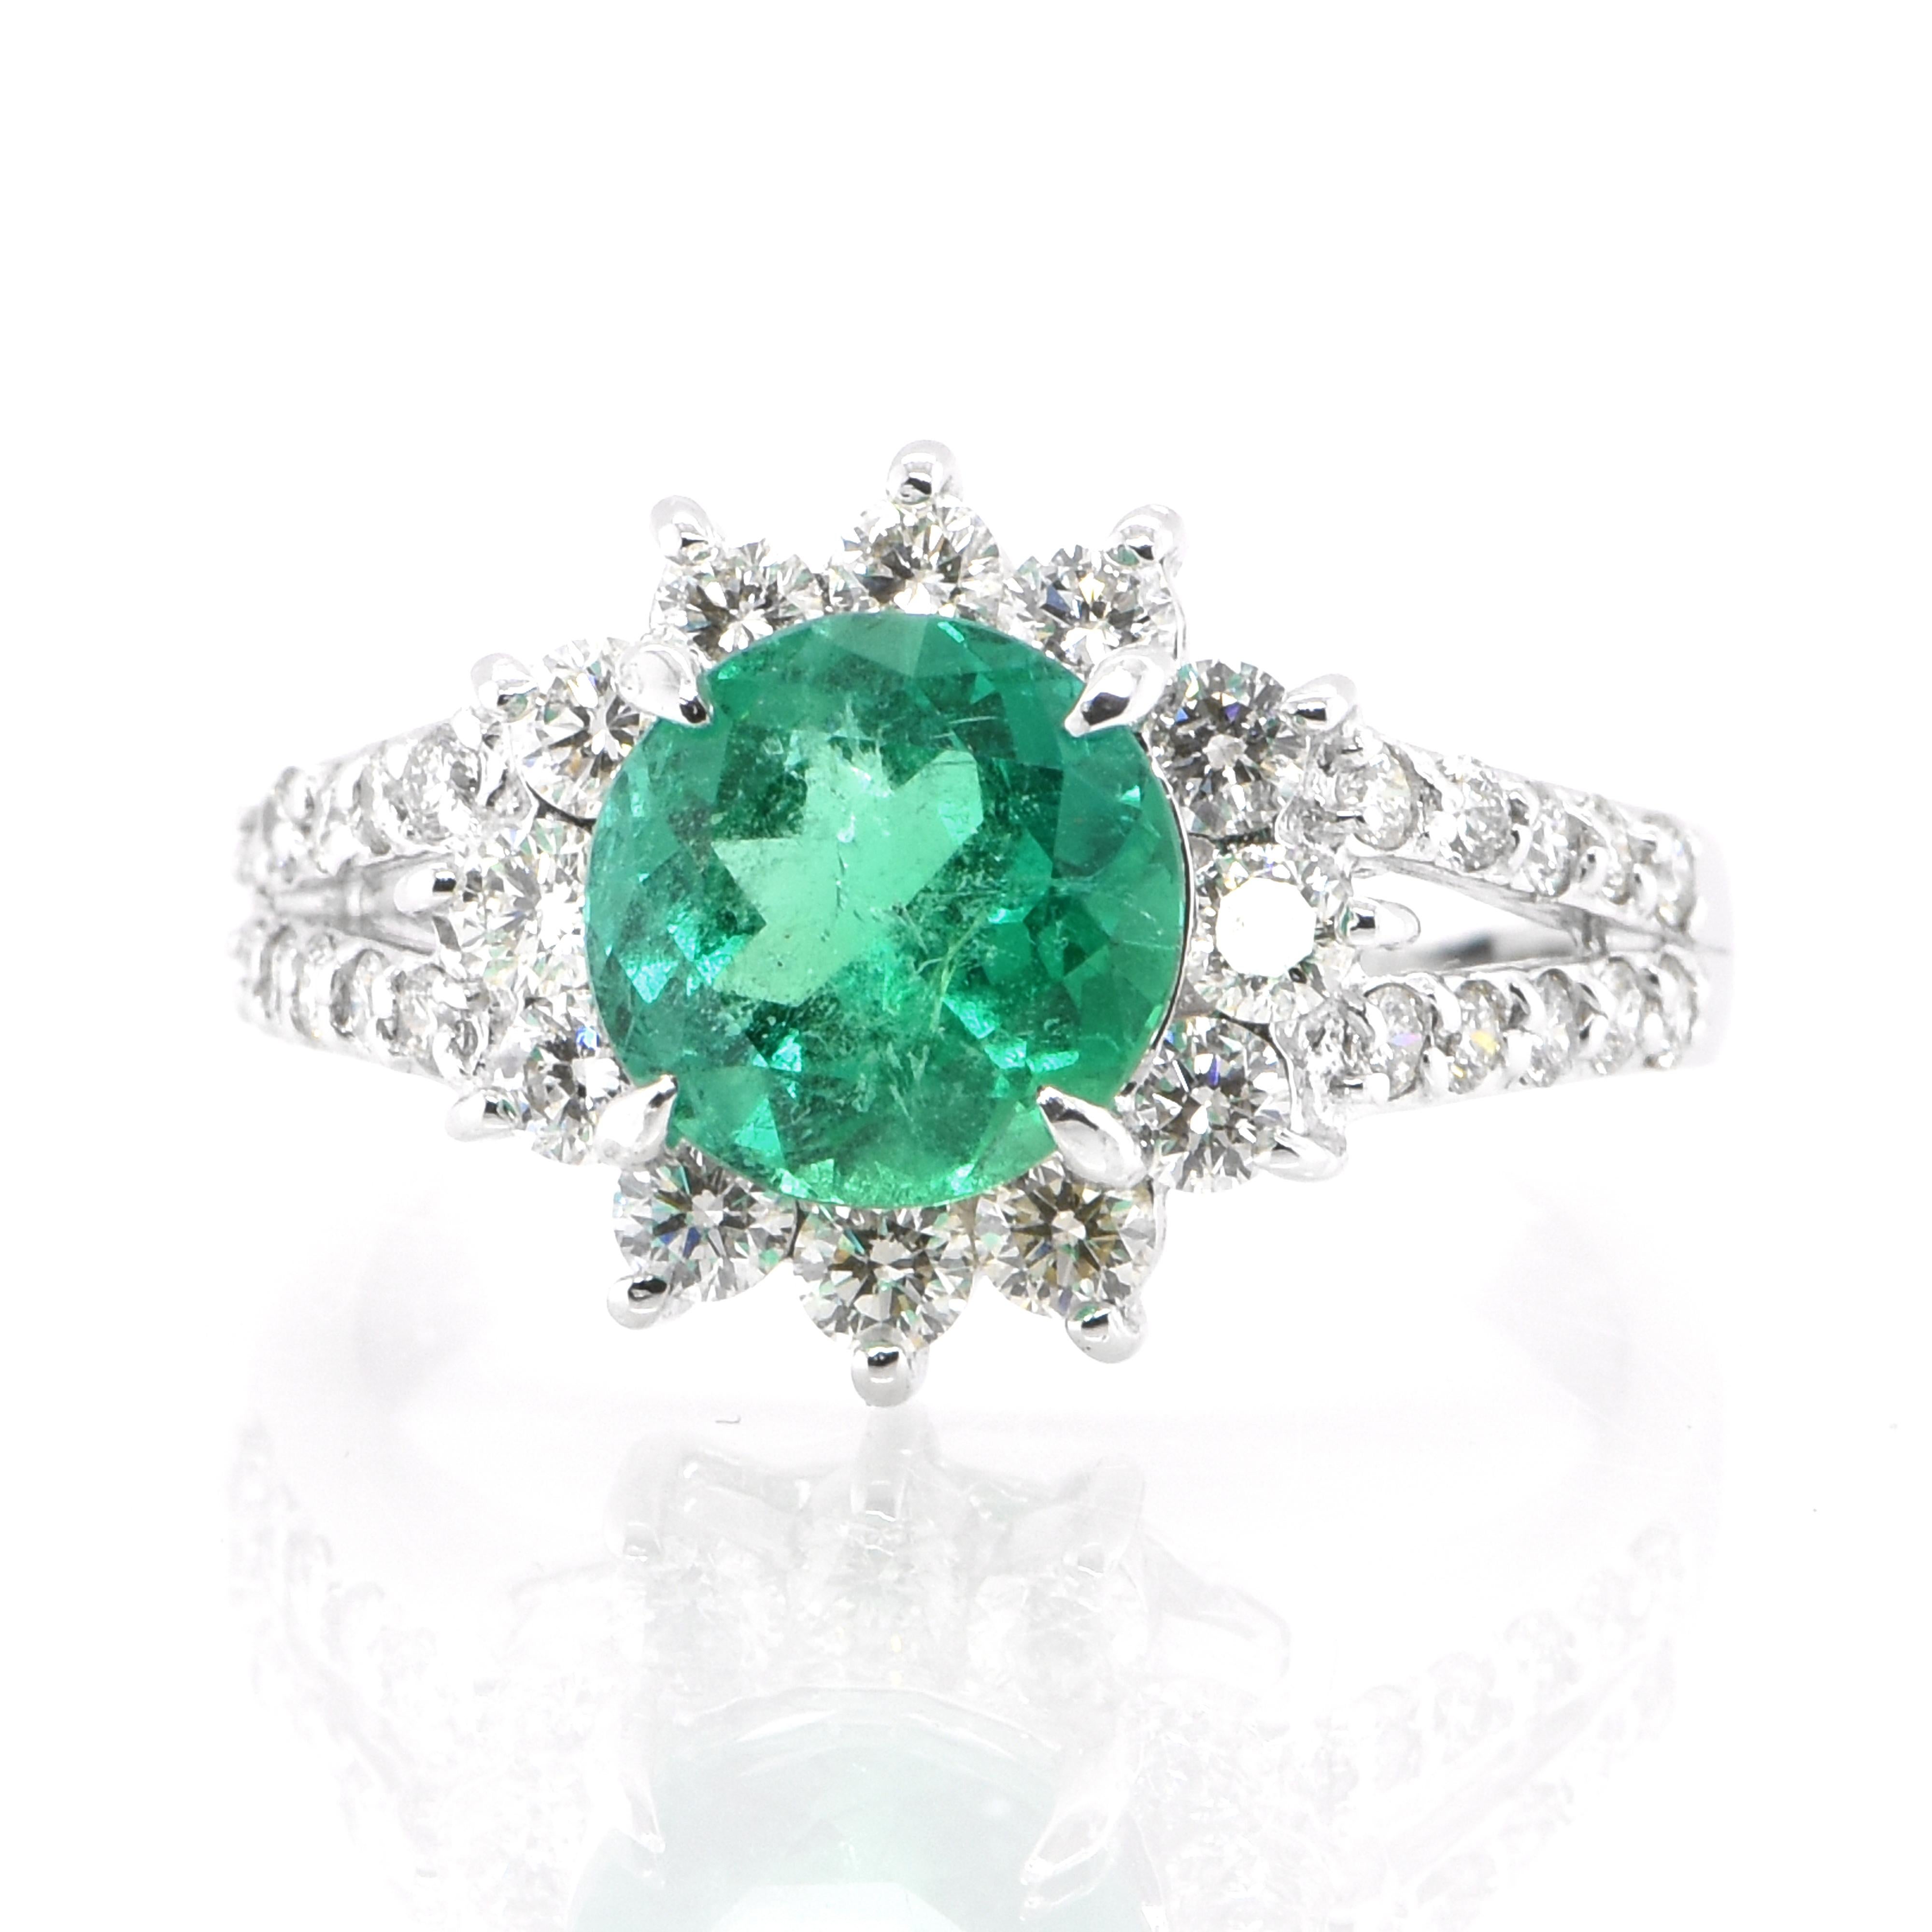 Modern 1.74 Carat Natural Colombian, Round-Cut Emerald and Diamond Ring Set in Platinum